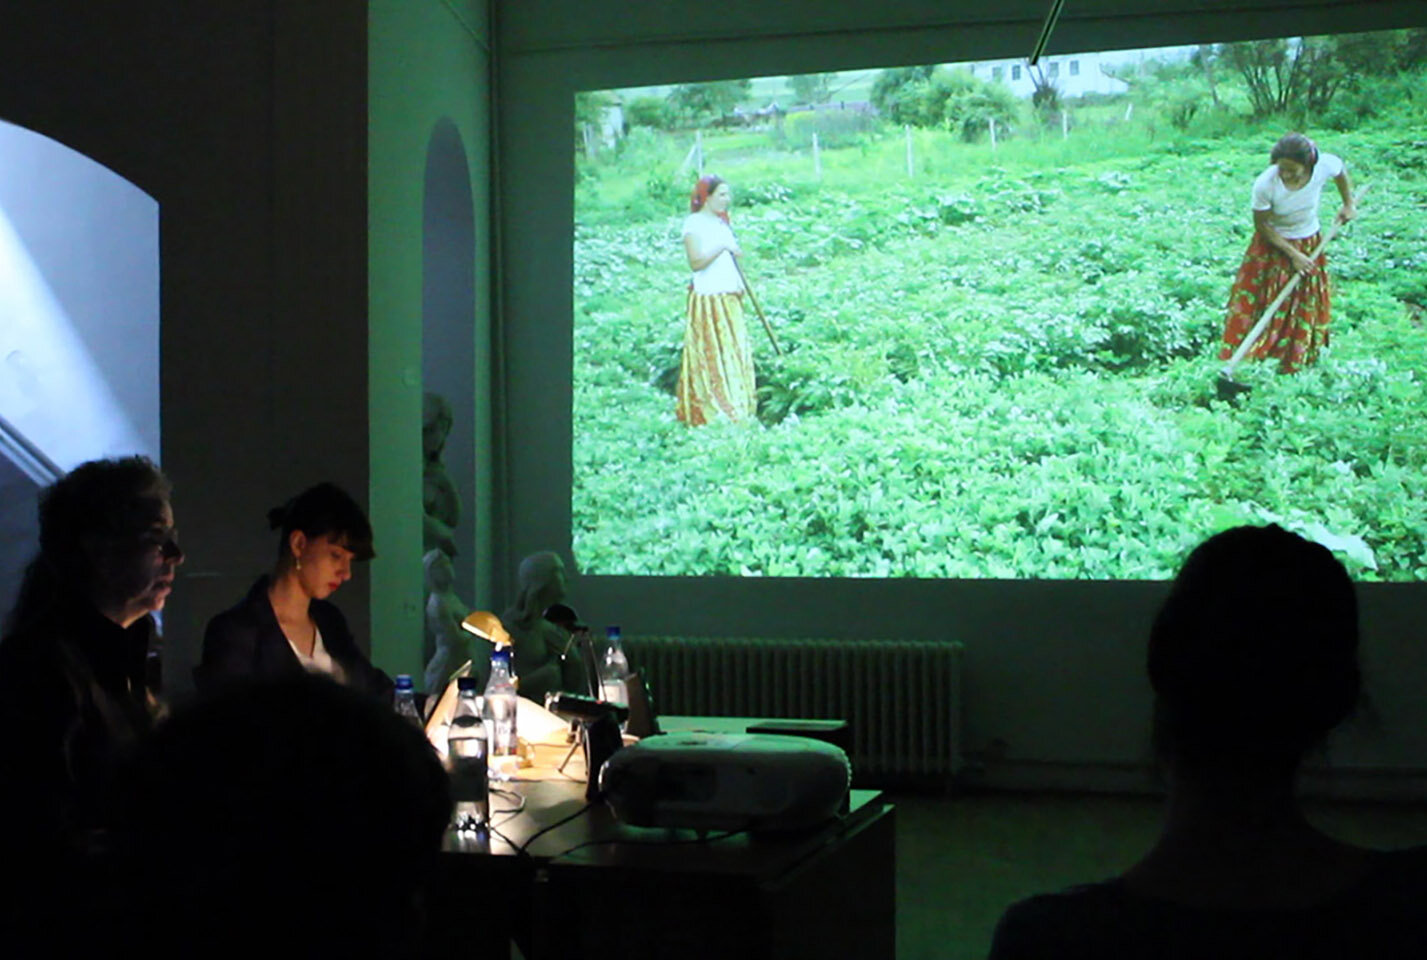   Distance and Proximities,  a performative lecture at UNA Galleria, Bucharest presented by The National University of the Arts and CEC Artslink with participation by Michaela Dragan and Delia Popa. 2014. 